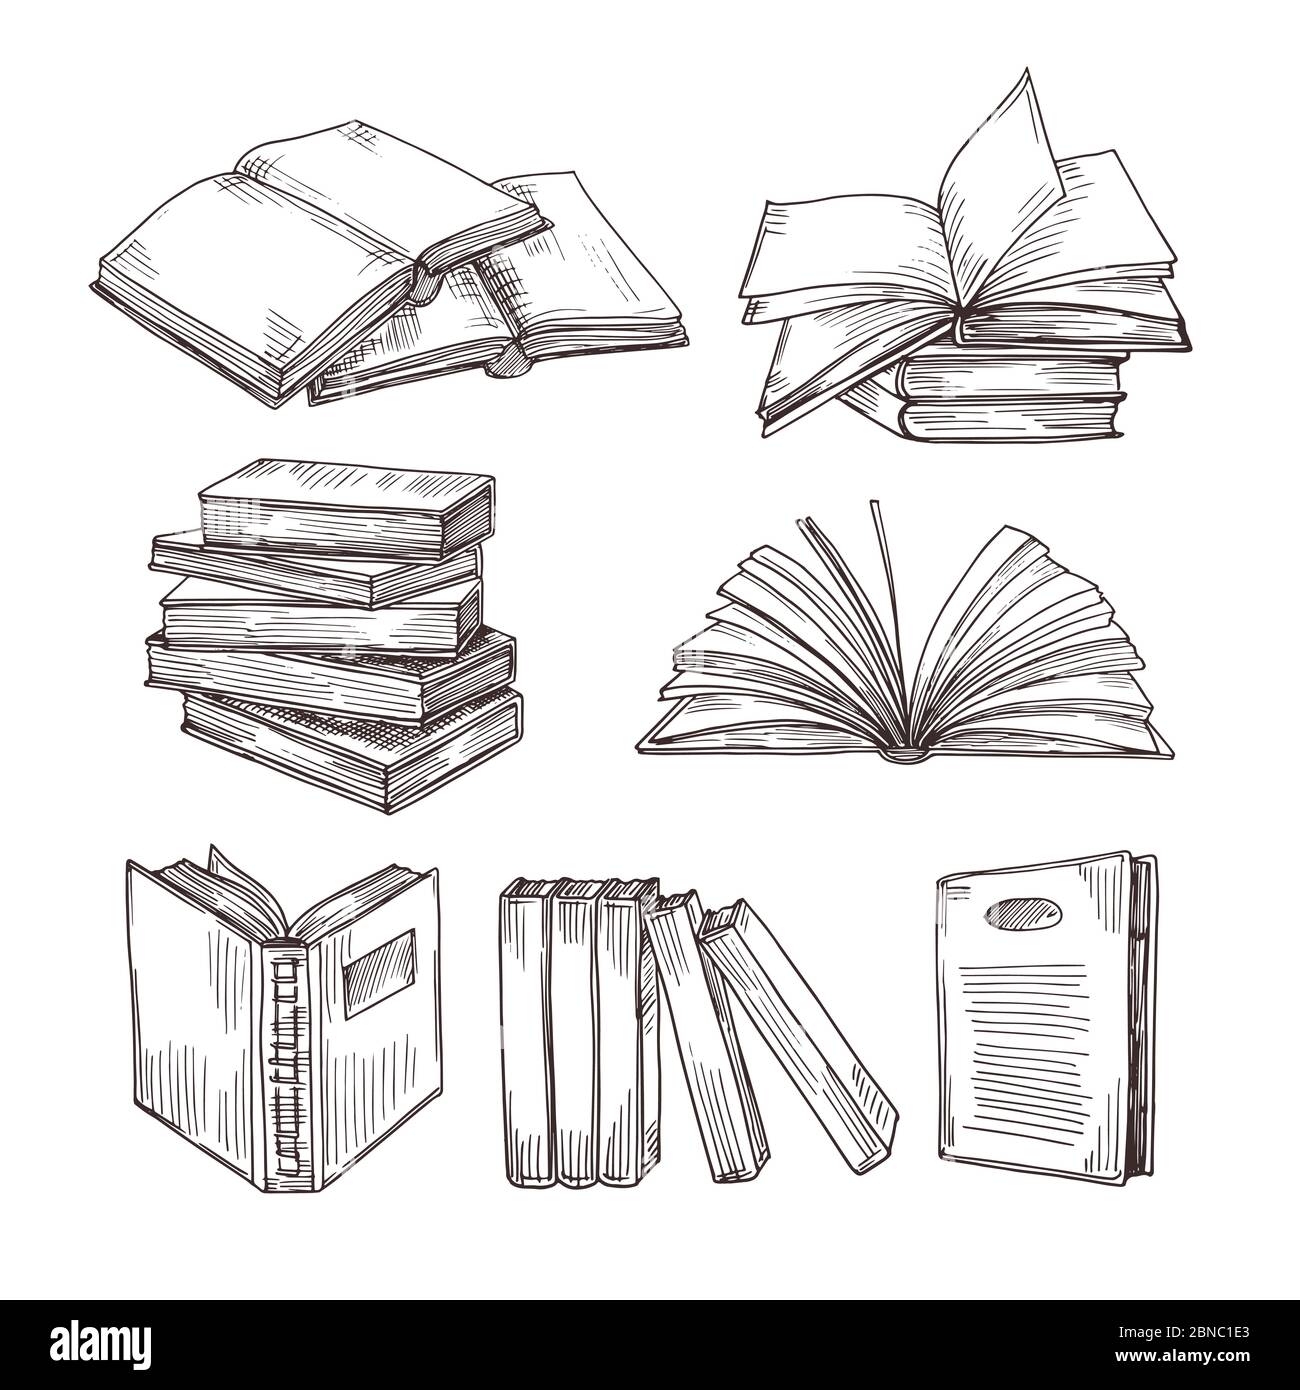 Sketch books. Ink drawing vintage open book and books pile. School education and library doodle vector symbols. Education book sketch, pile of literature drawing illustration Stock Vector